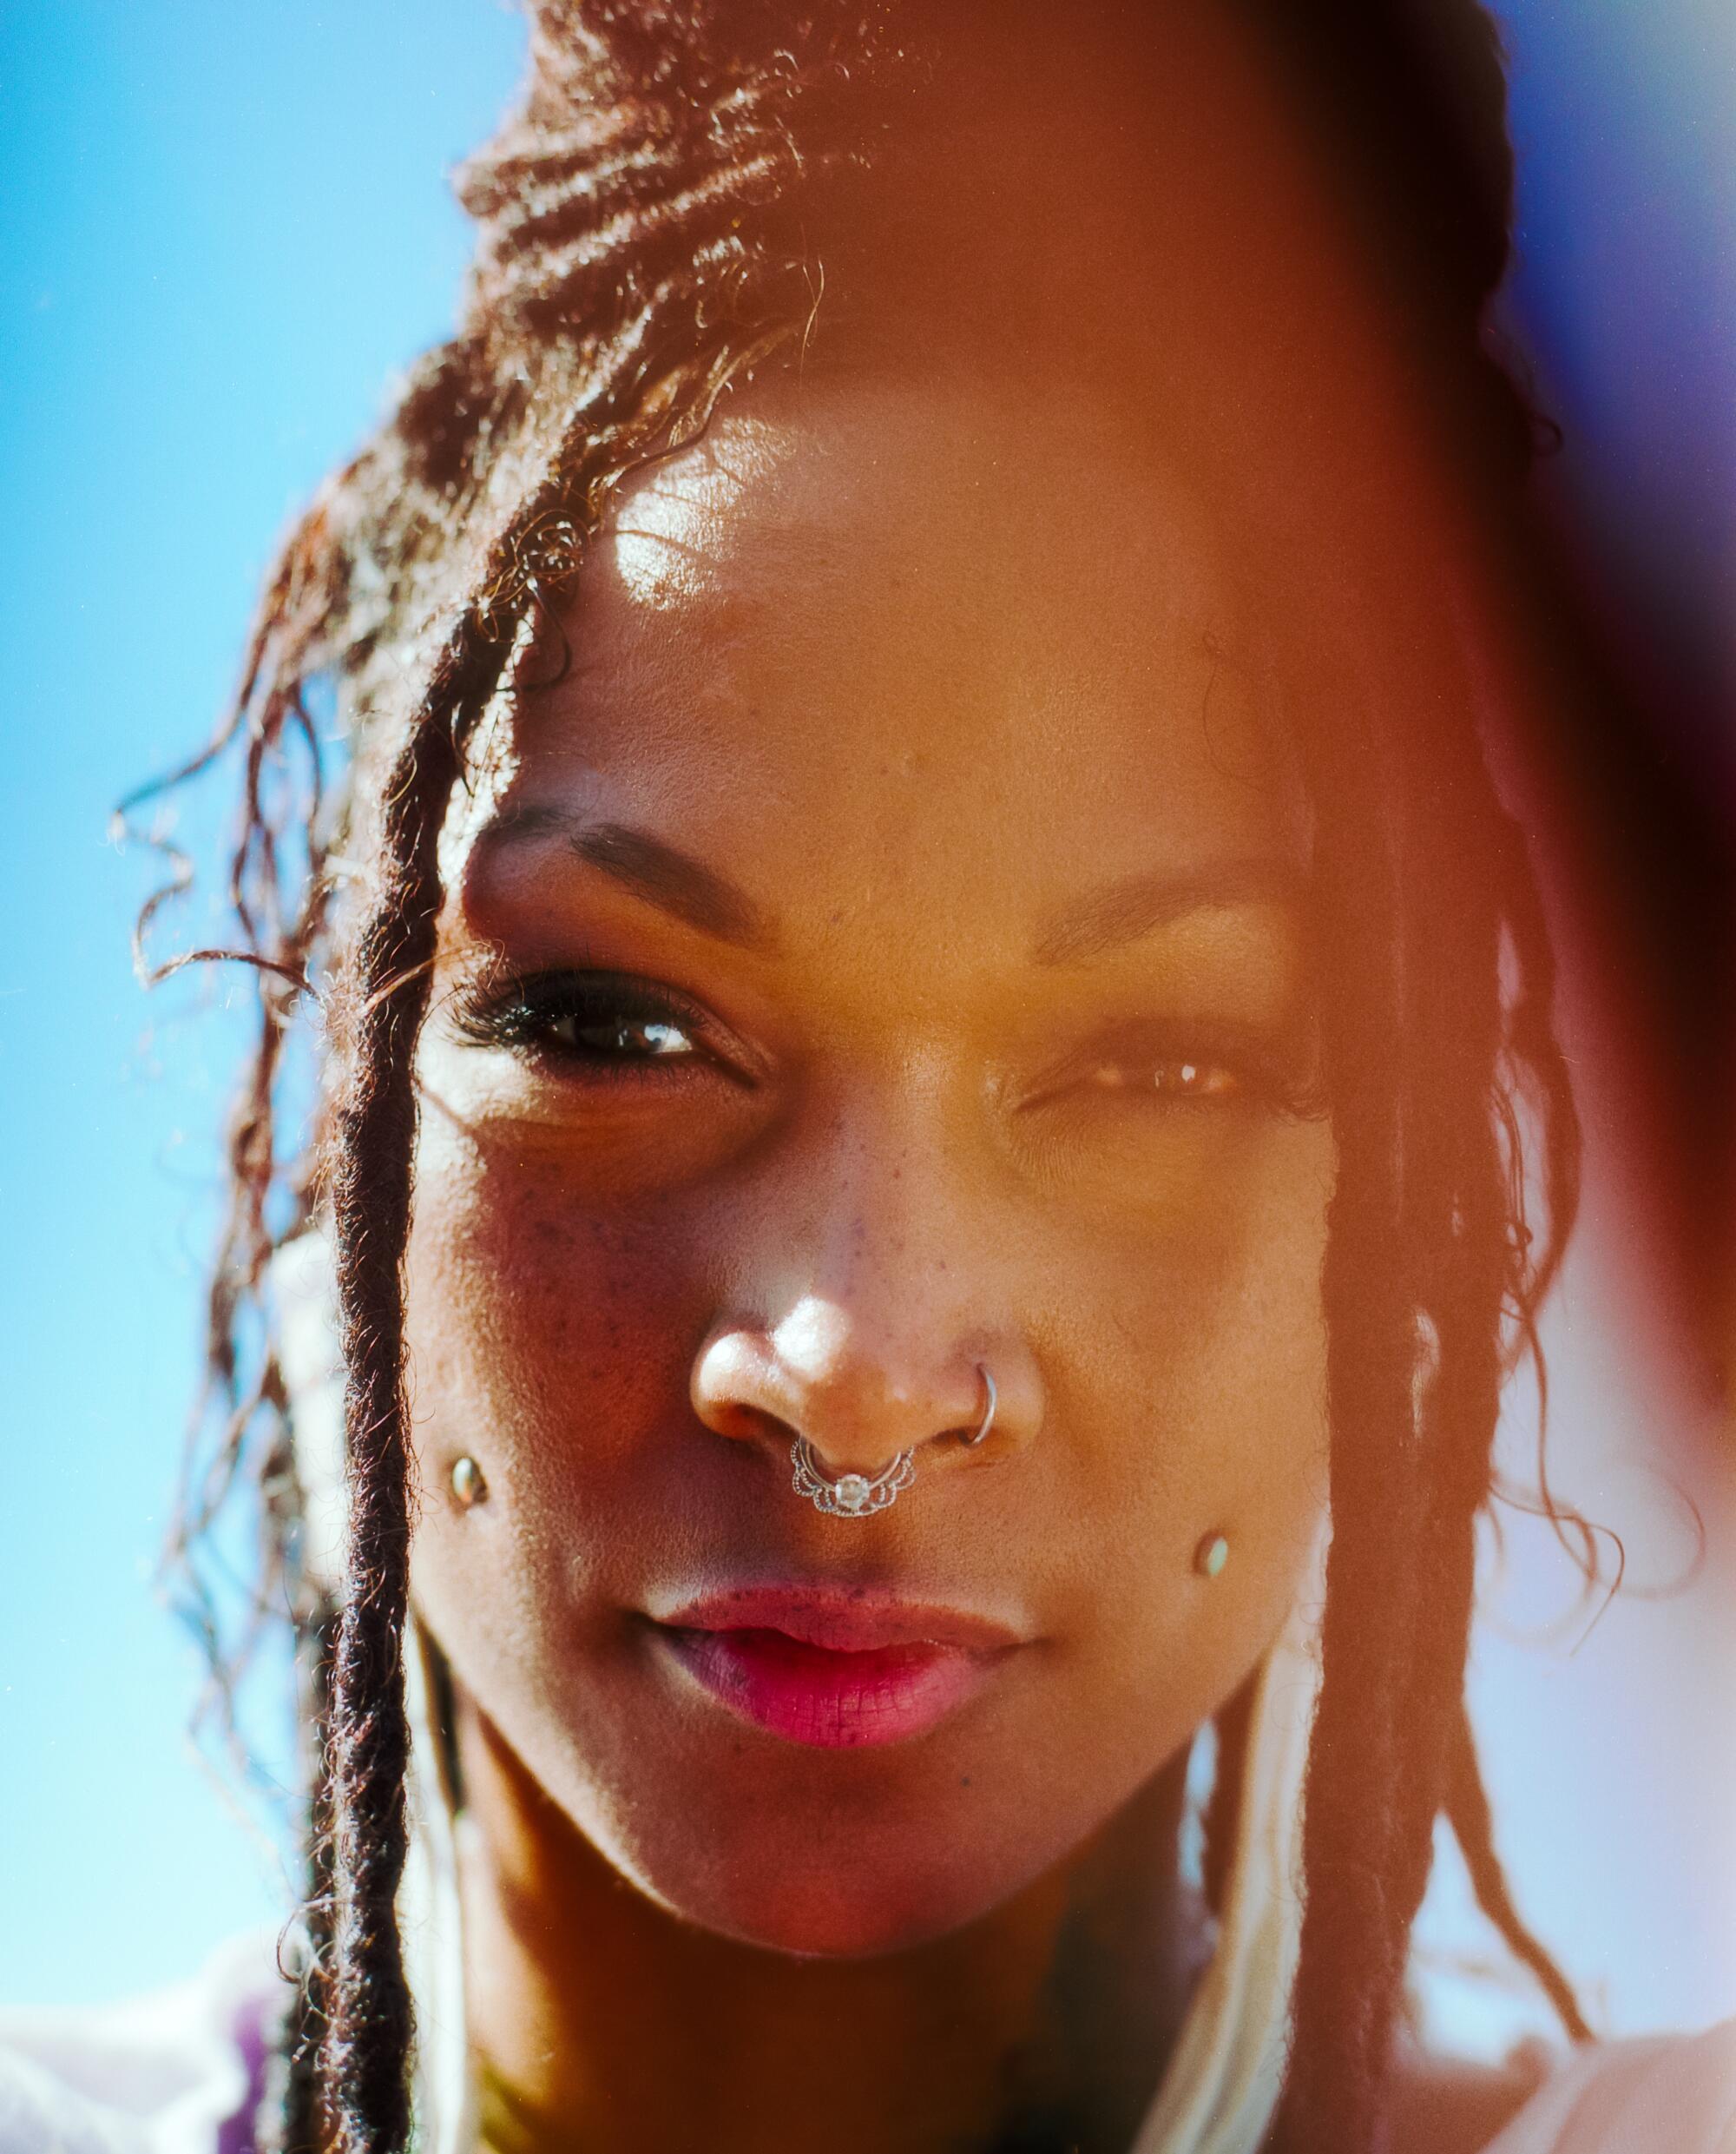 A closeup portrait  of a woman with her hair in thin braids.